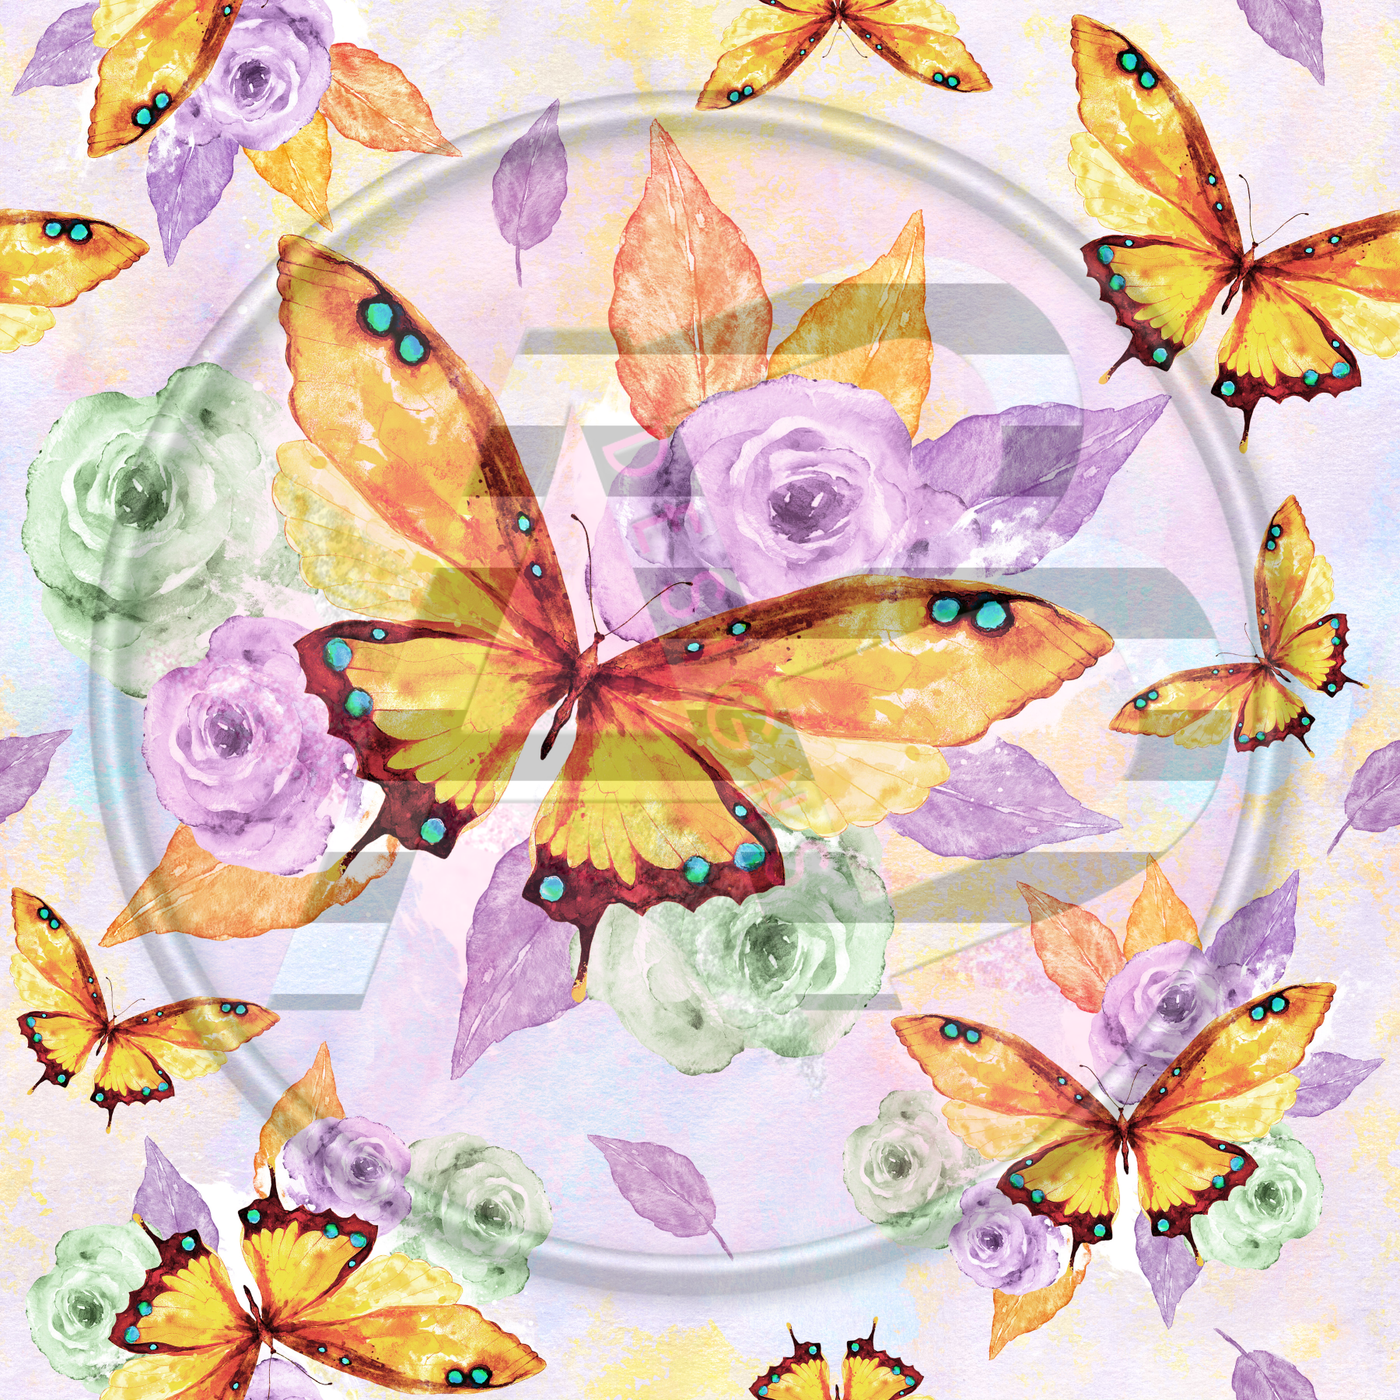 Adhesive Patterned Vinyl - Butterfly 16